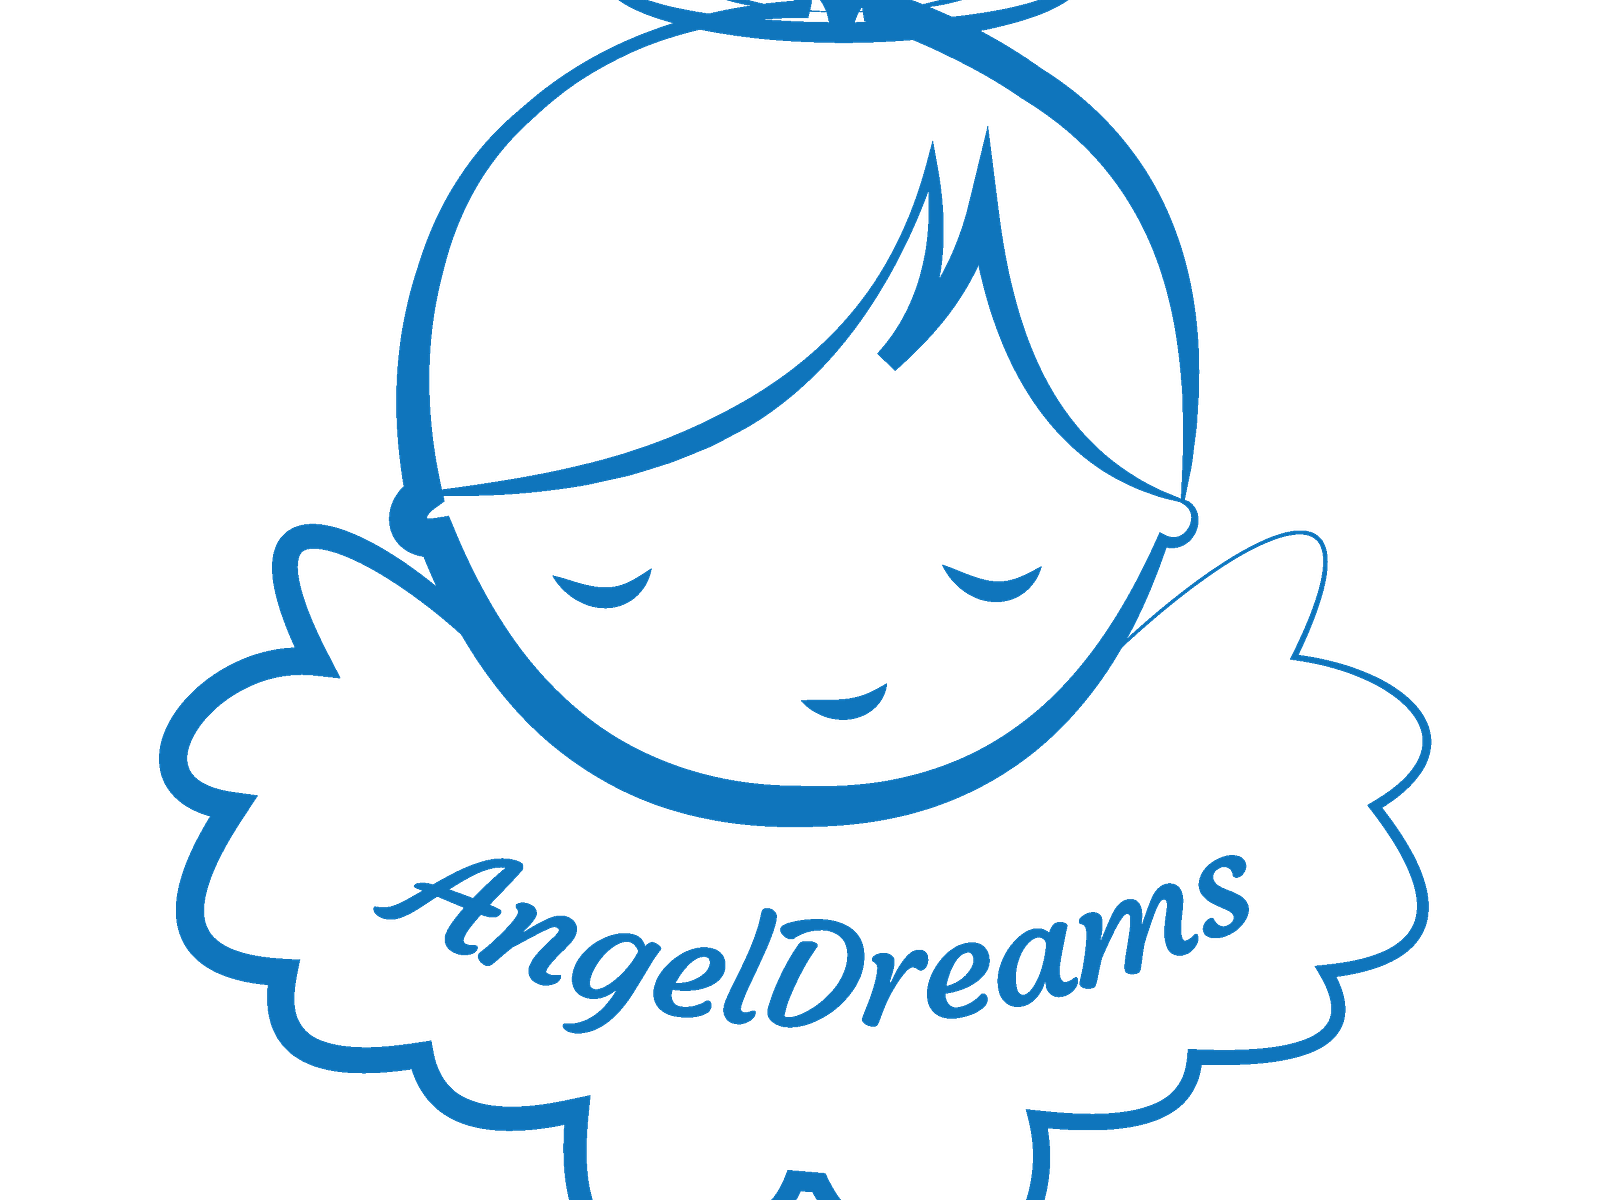 Angel Dreams new logo by Anabel Matos on Dribbble